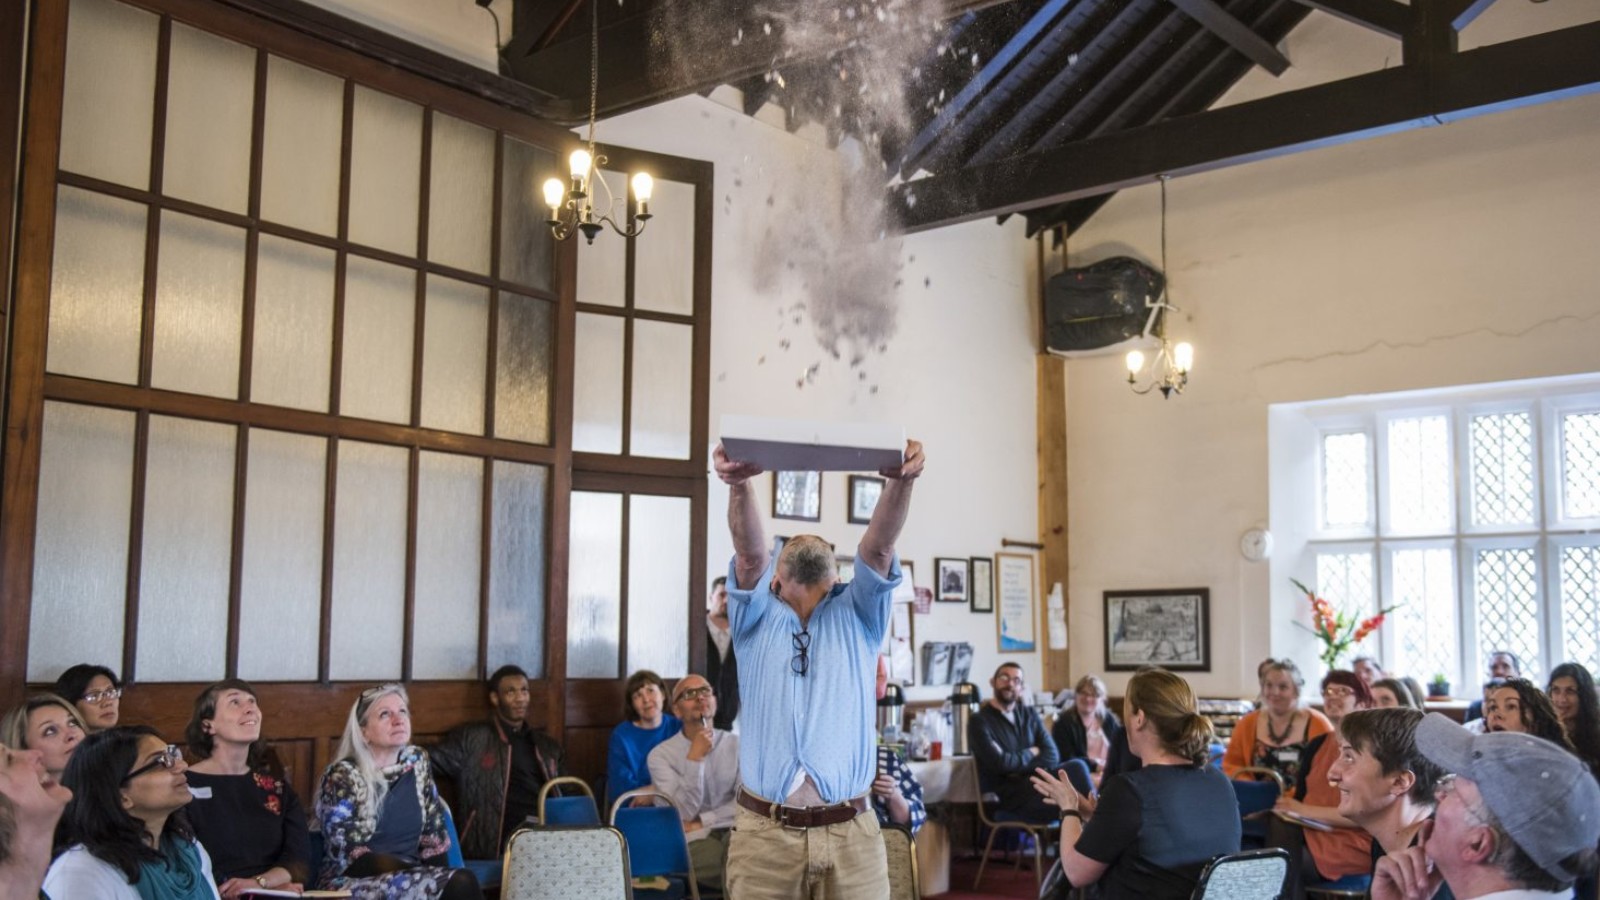 In the middle of a large room with wooden beams and dividers a man stands throwing a cloud of jigsaw pieces and glitter in to the air above his head. An audience look in to the air towards the cloud, some smiling.